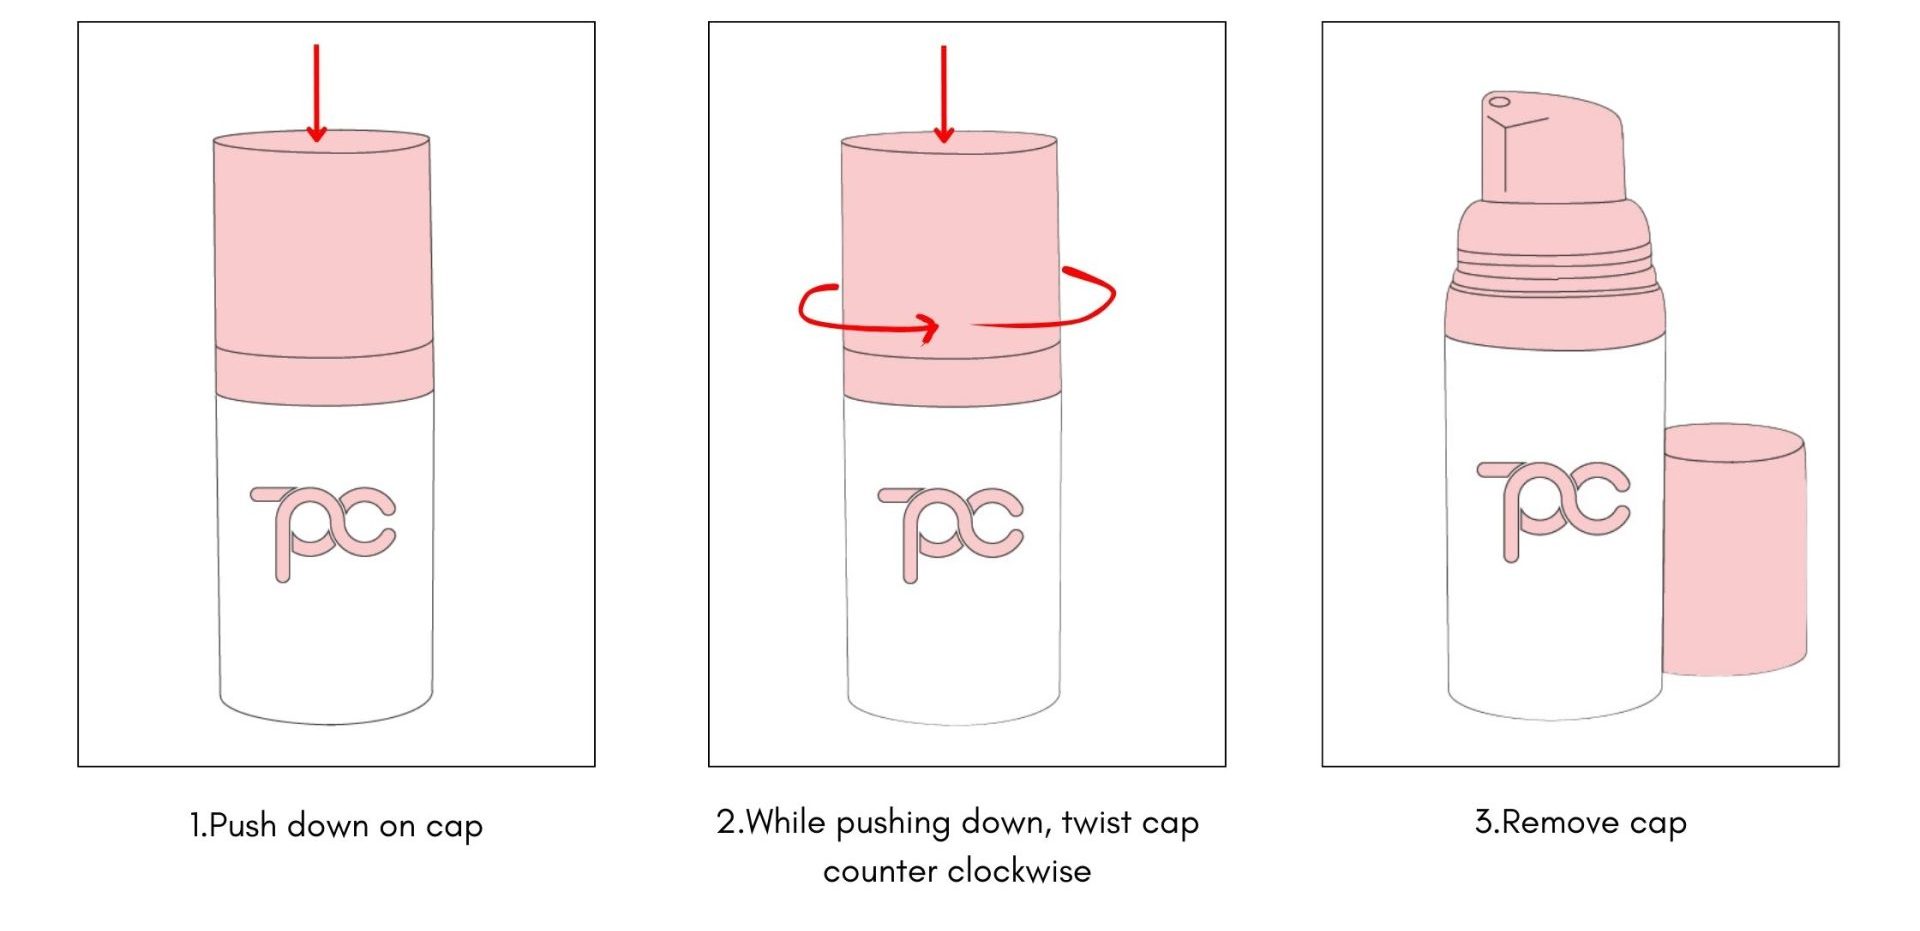 CR Airless Pump Bottle Instructions, How-To Twist the CR Cap Off